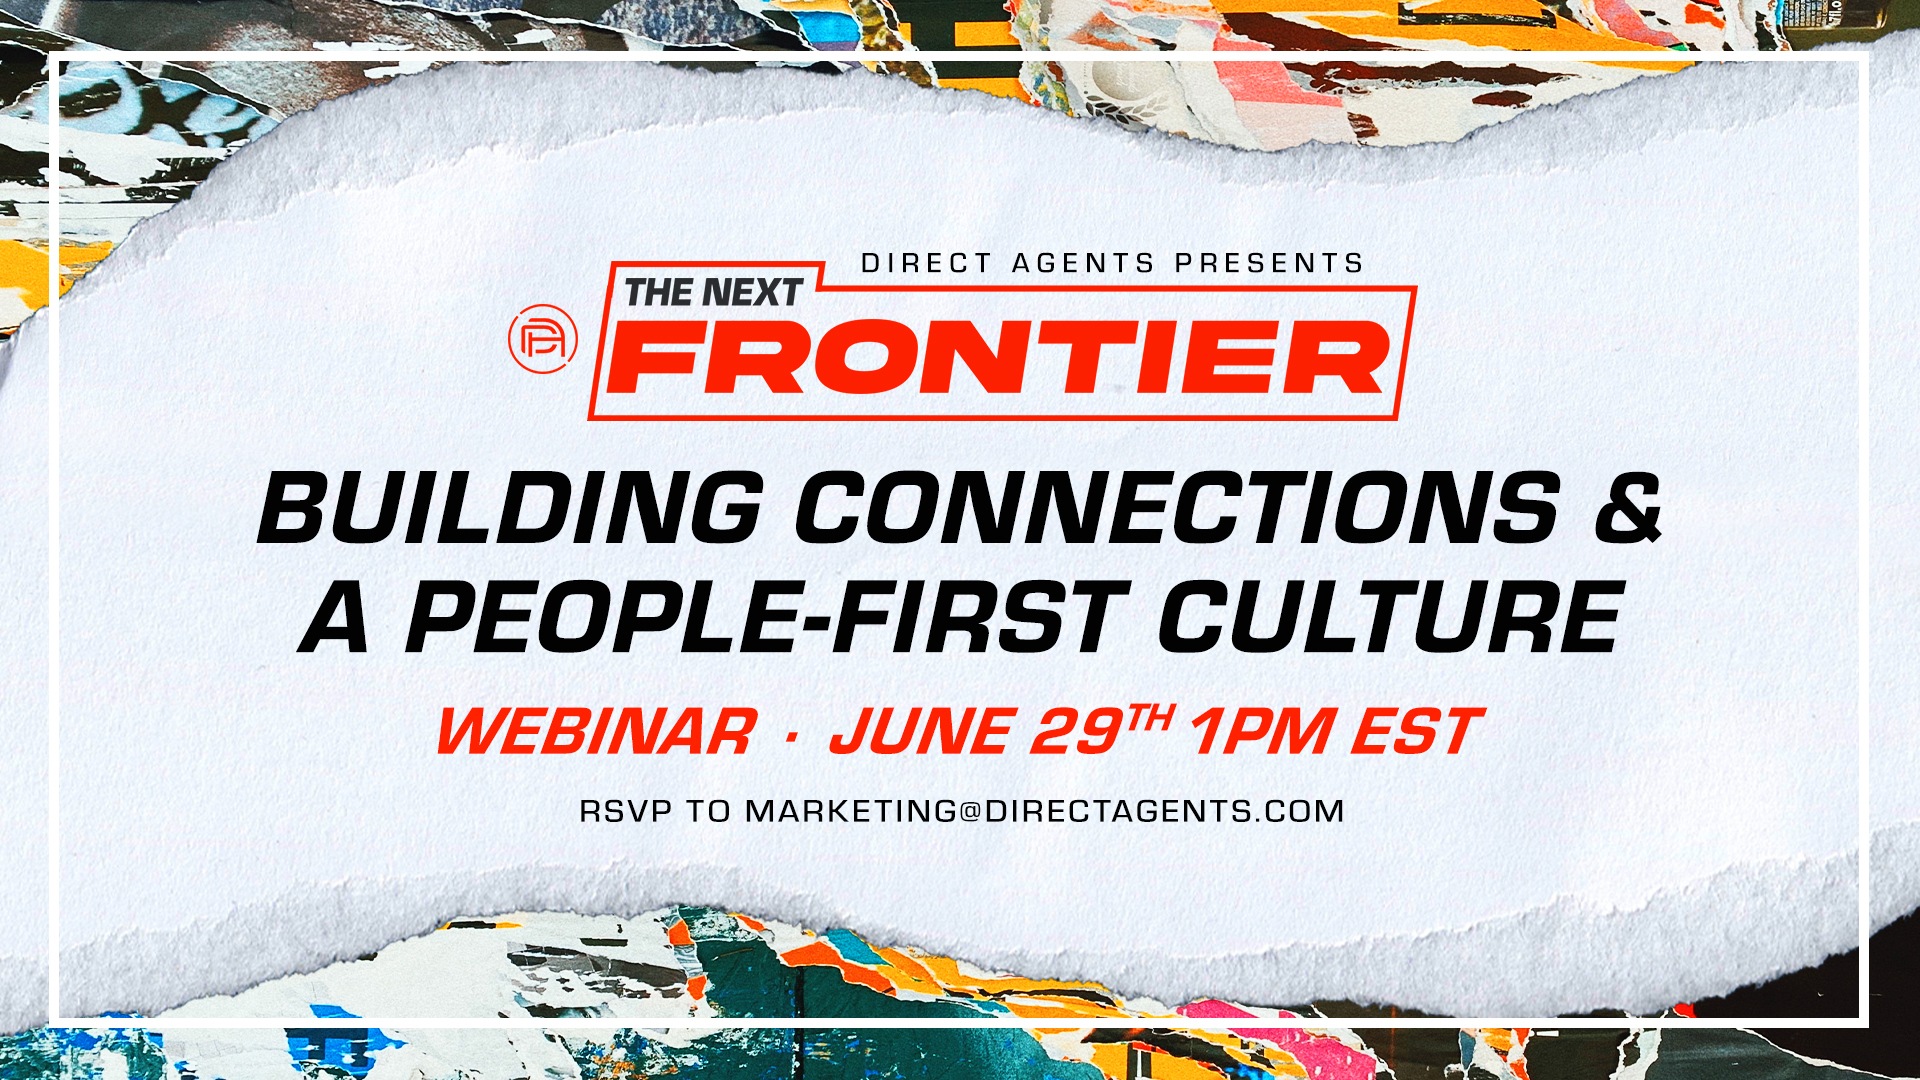 “The Next Frontier: Building Connections & a People-First Culture” – Key Takeaways